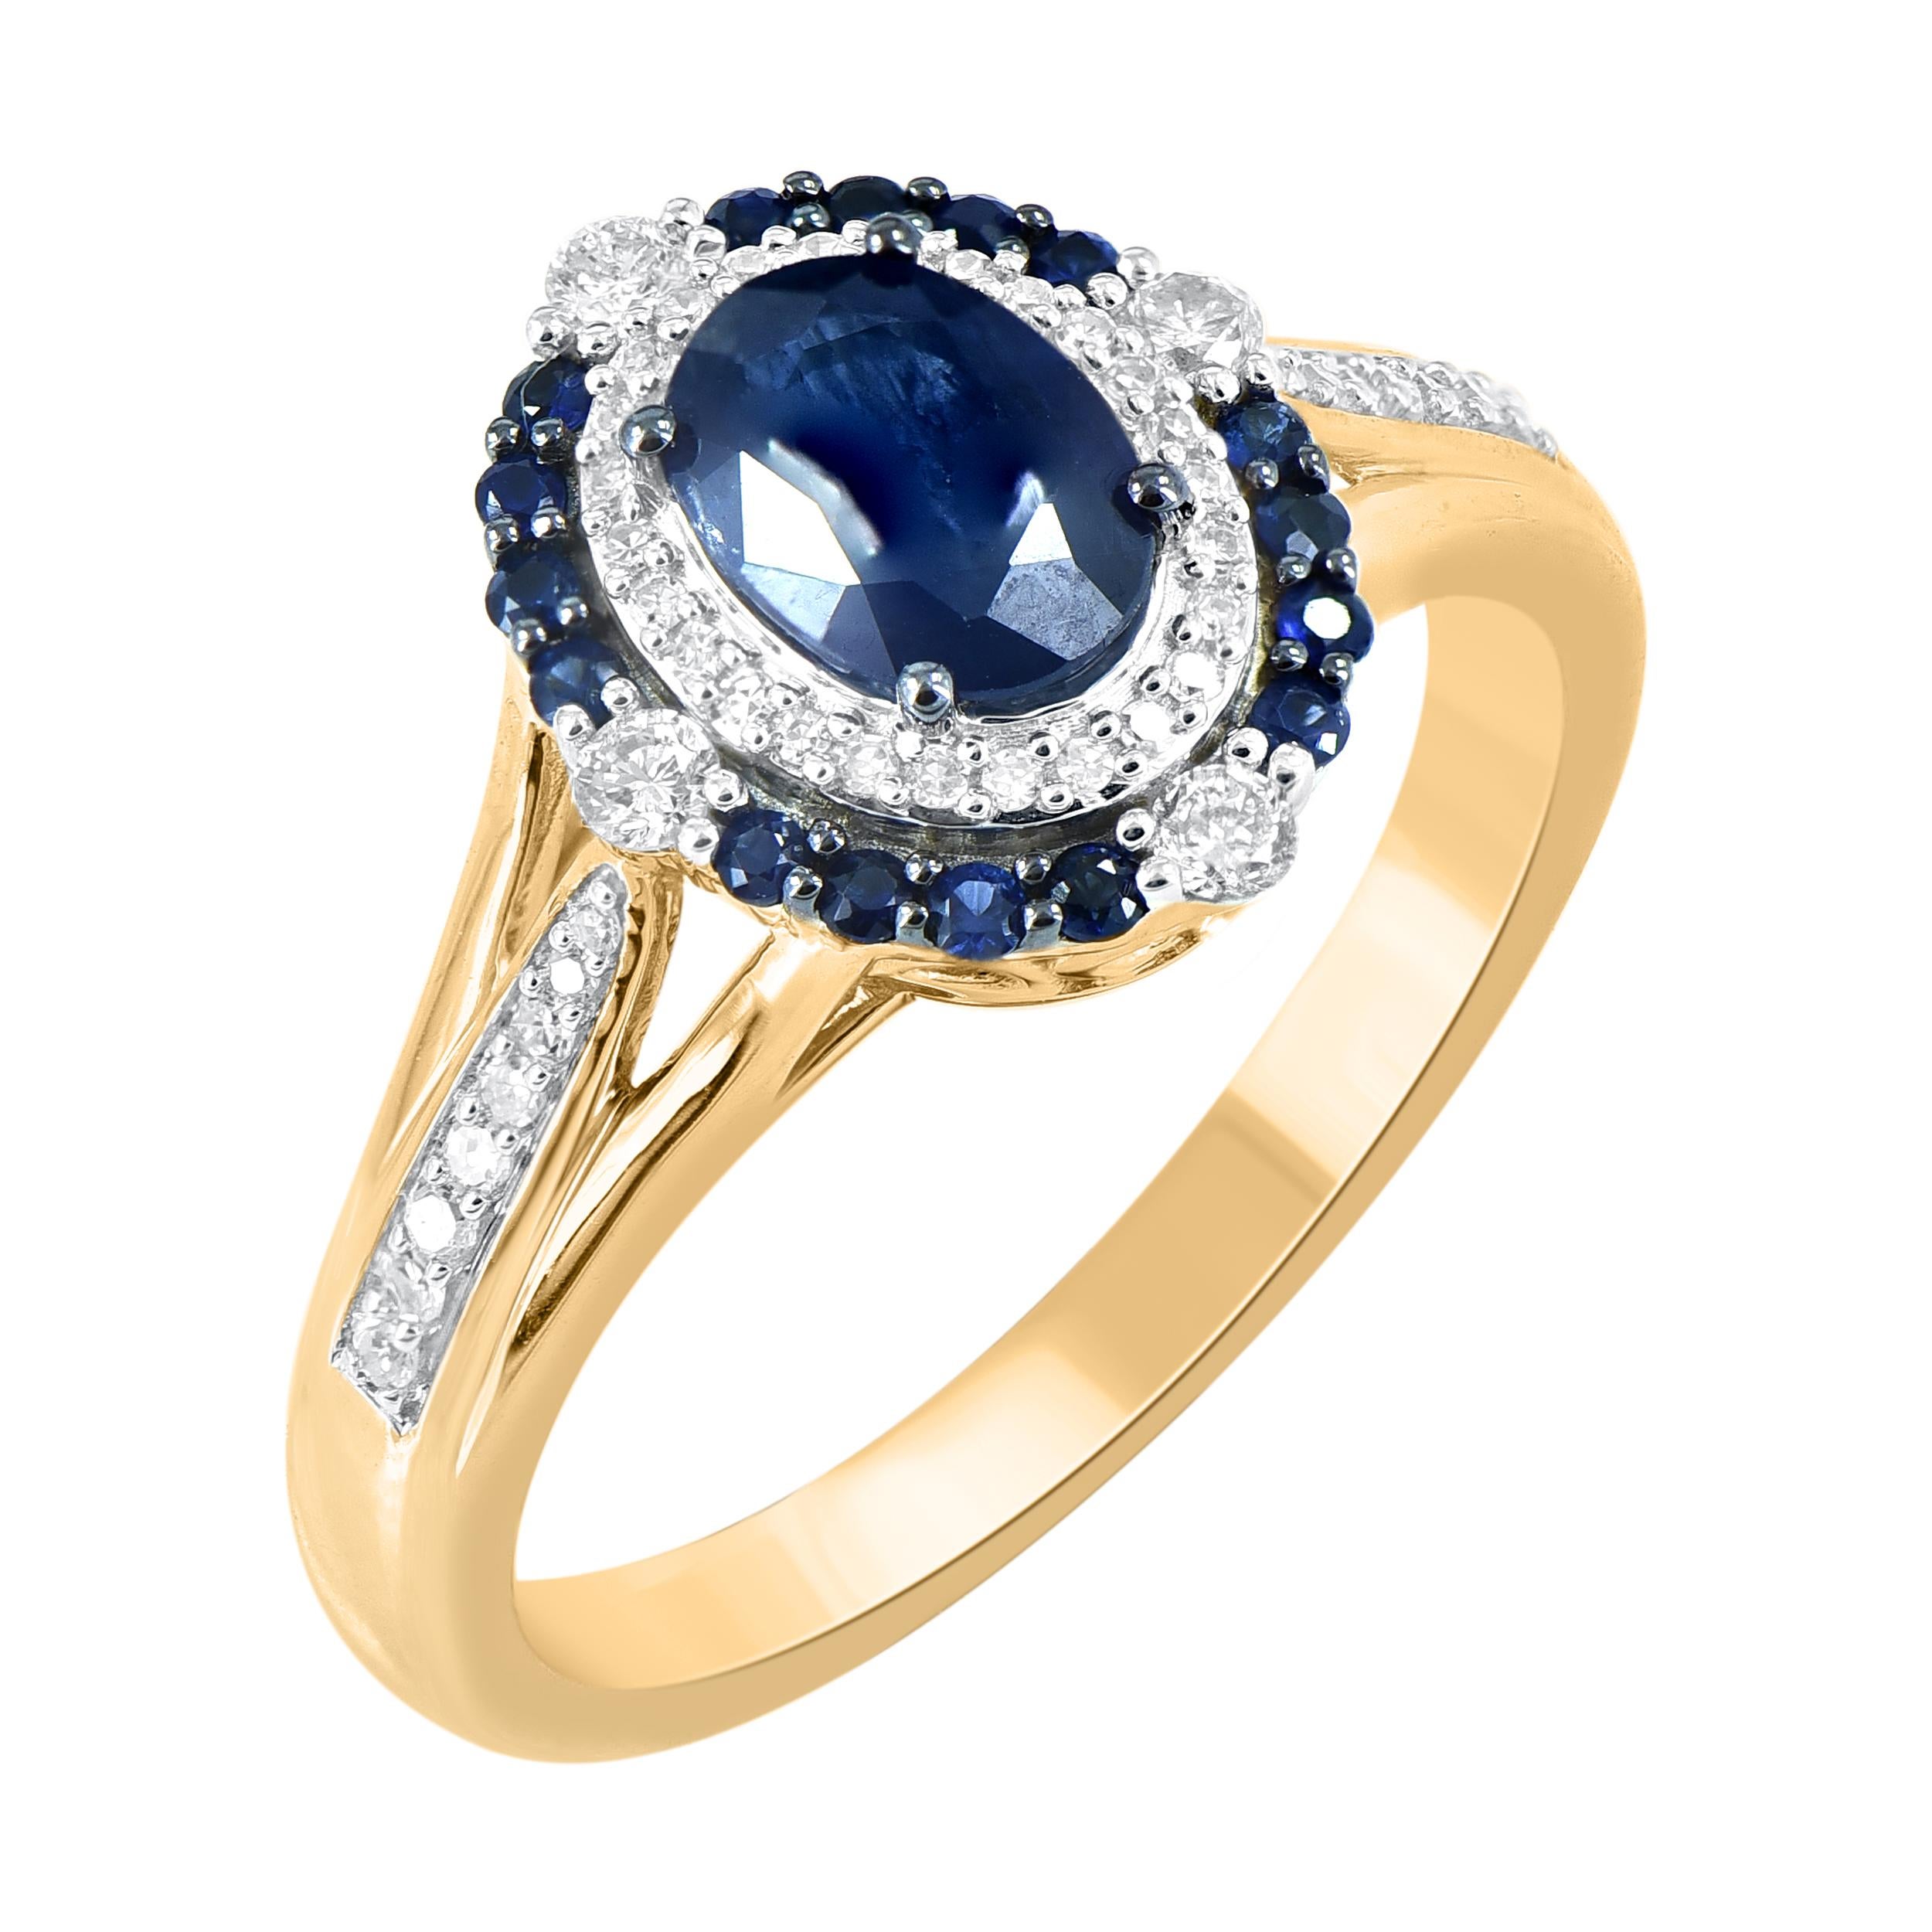 This ring dazzles with diamond and blue sapphire. Decorated with shimmering 46 single cut & brilliant cut diamonds and 1 oval blue sapphire set in prong & pave setting. We only use 100% natural and conflict free diamonds which sparkles in H-I color